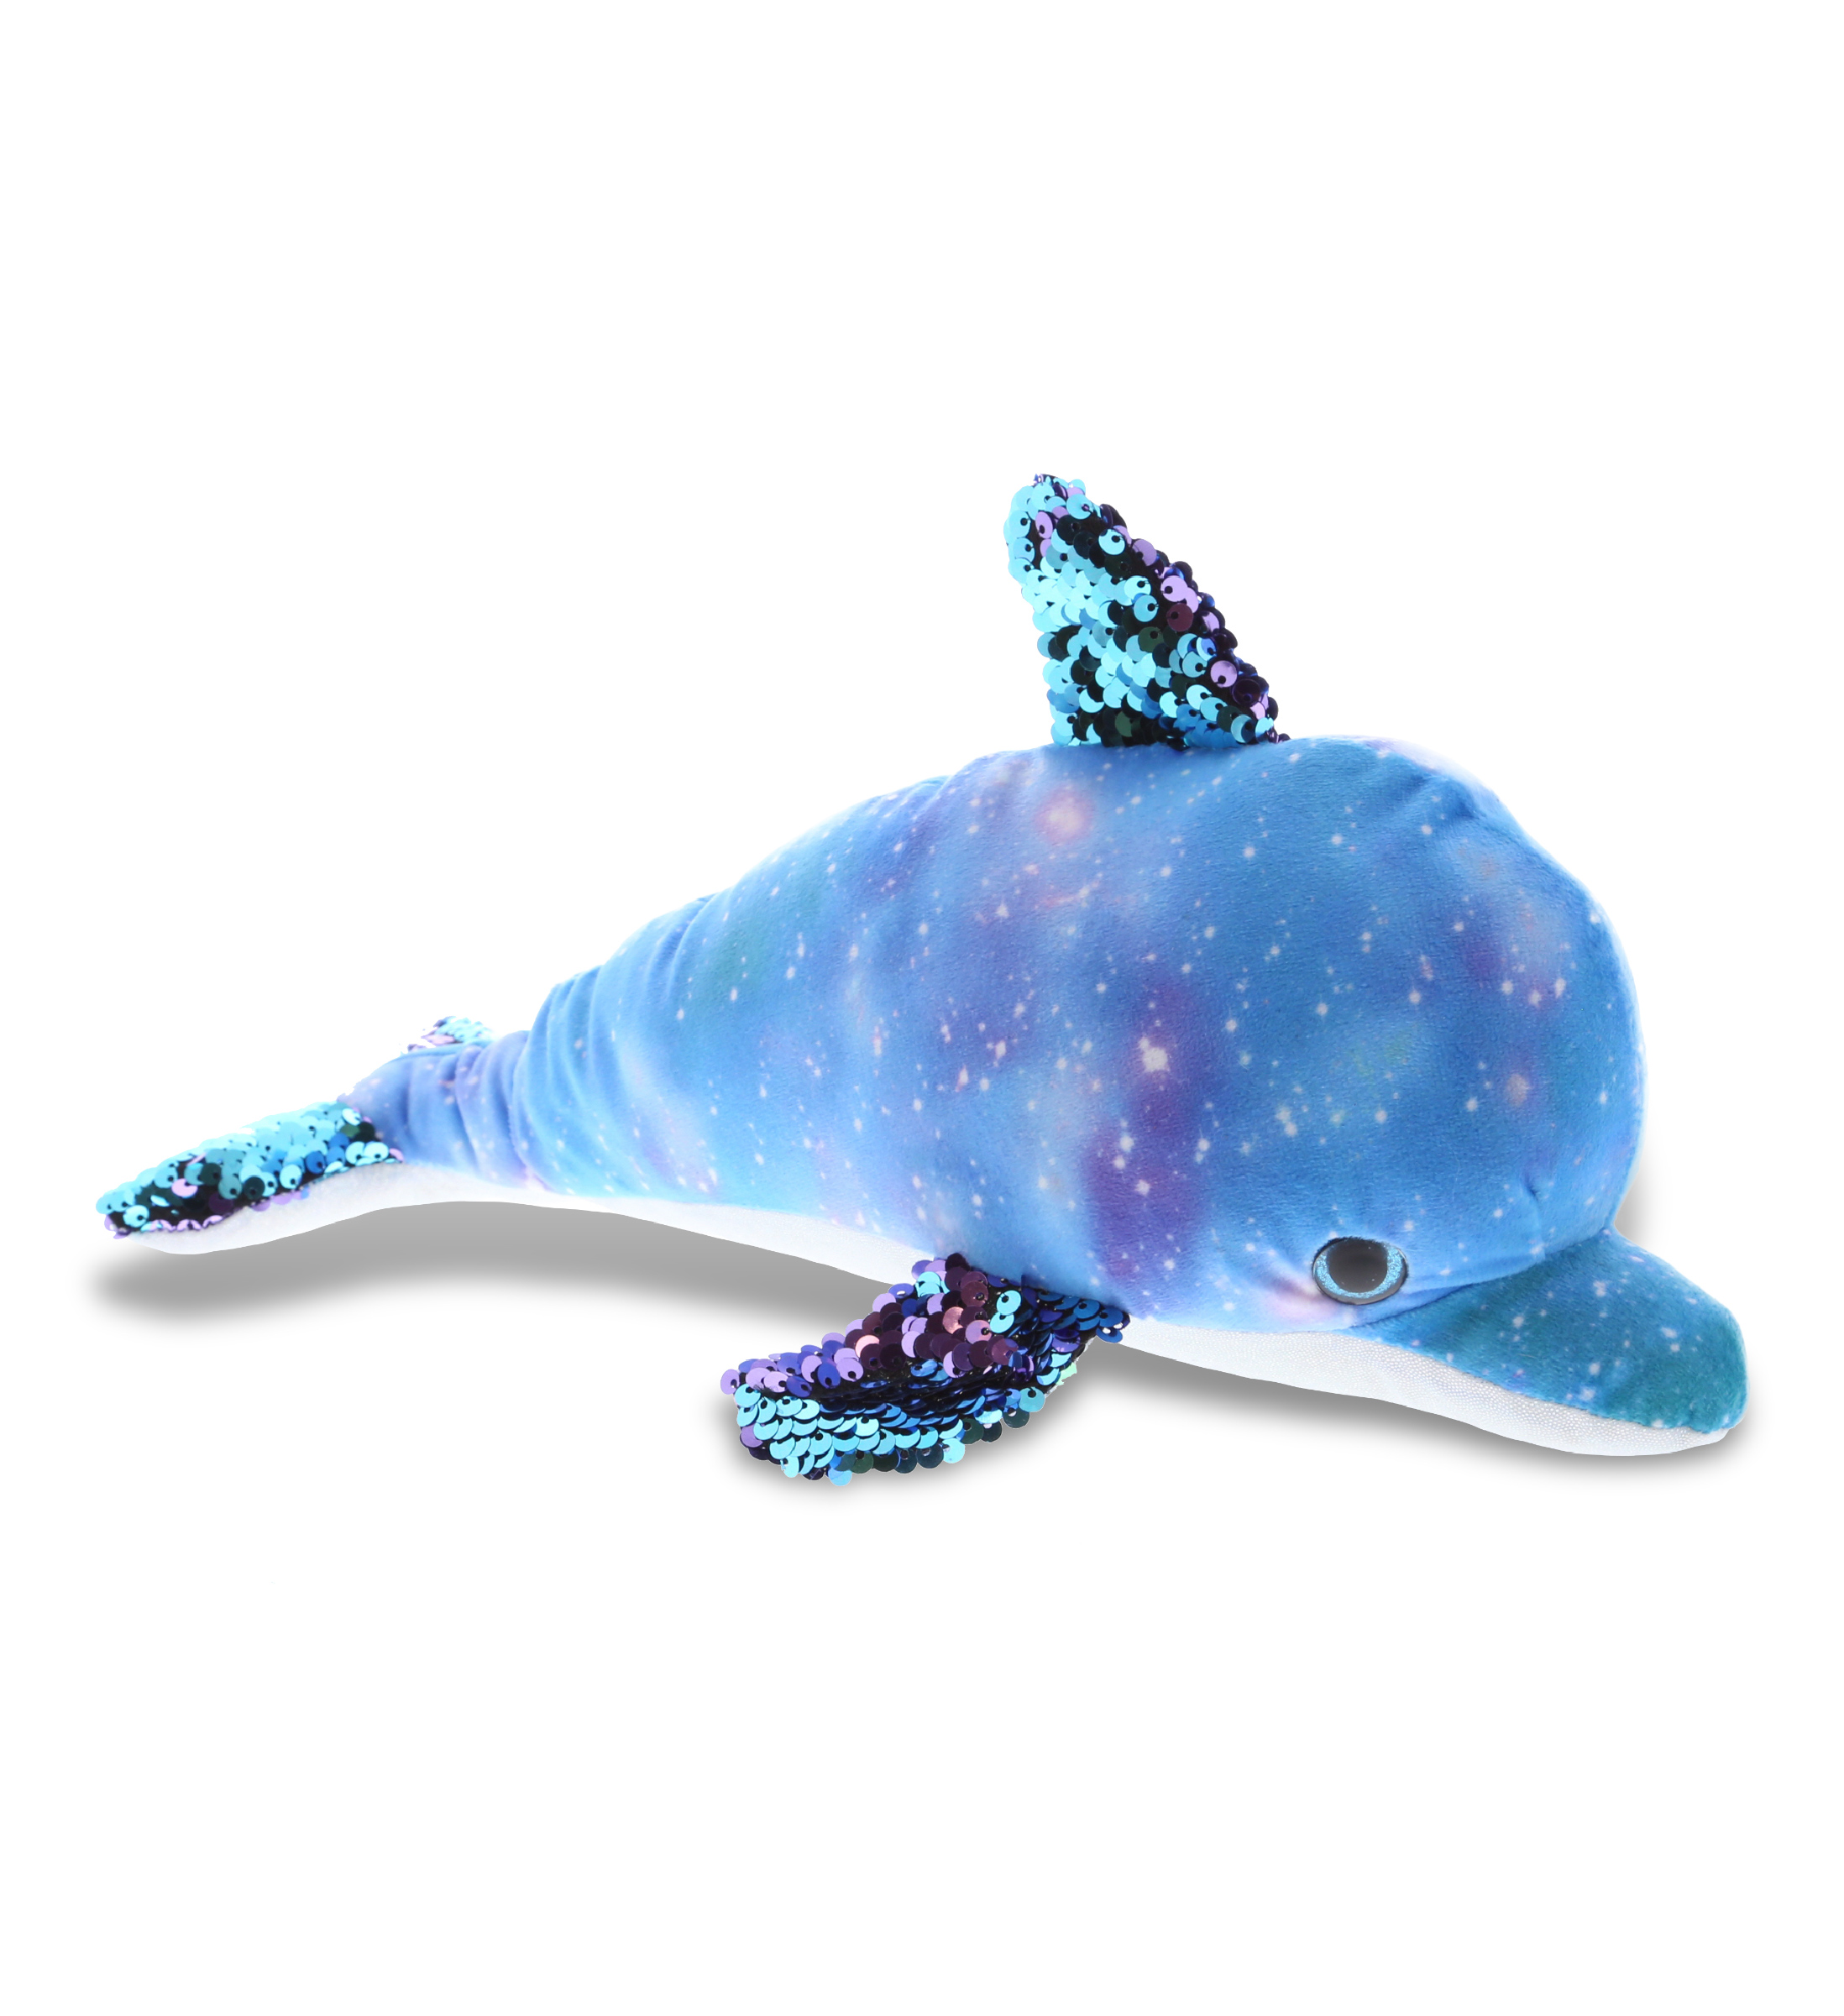 Sequinimals Sequin Sea Animals ~ Pink Dolphin & Great White Shark Set by Reversible Mermaid Sequins Rinco 